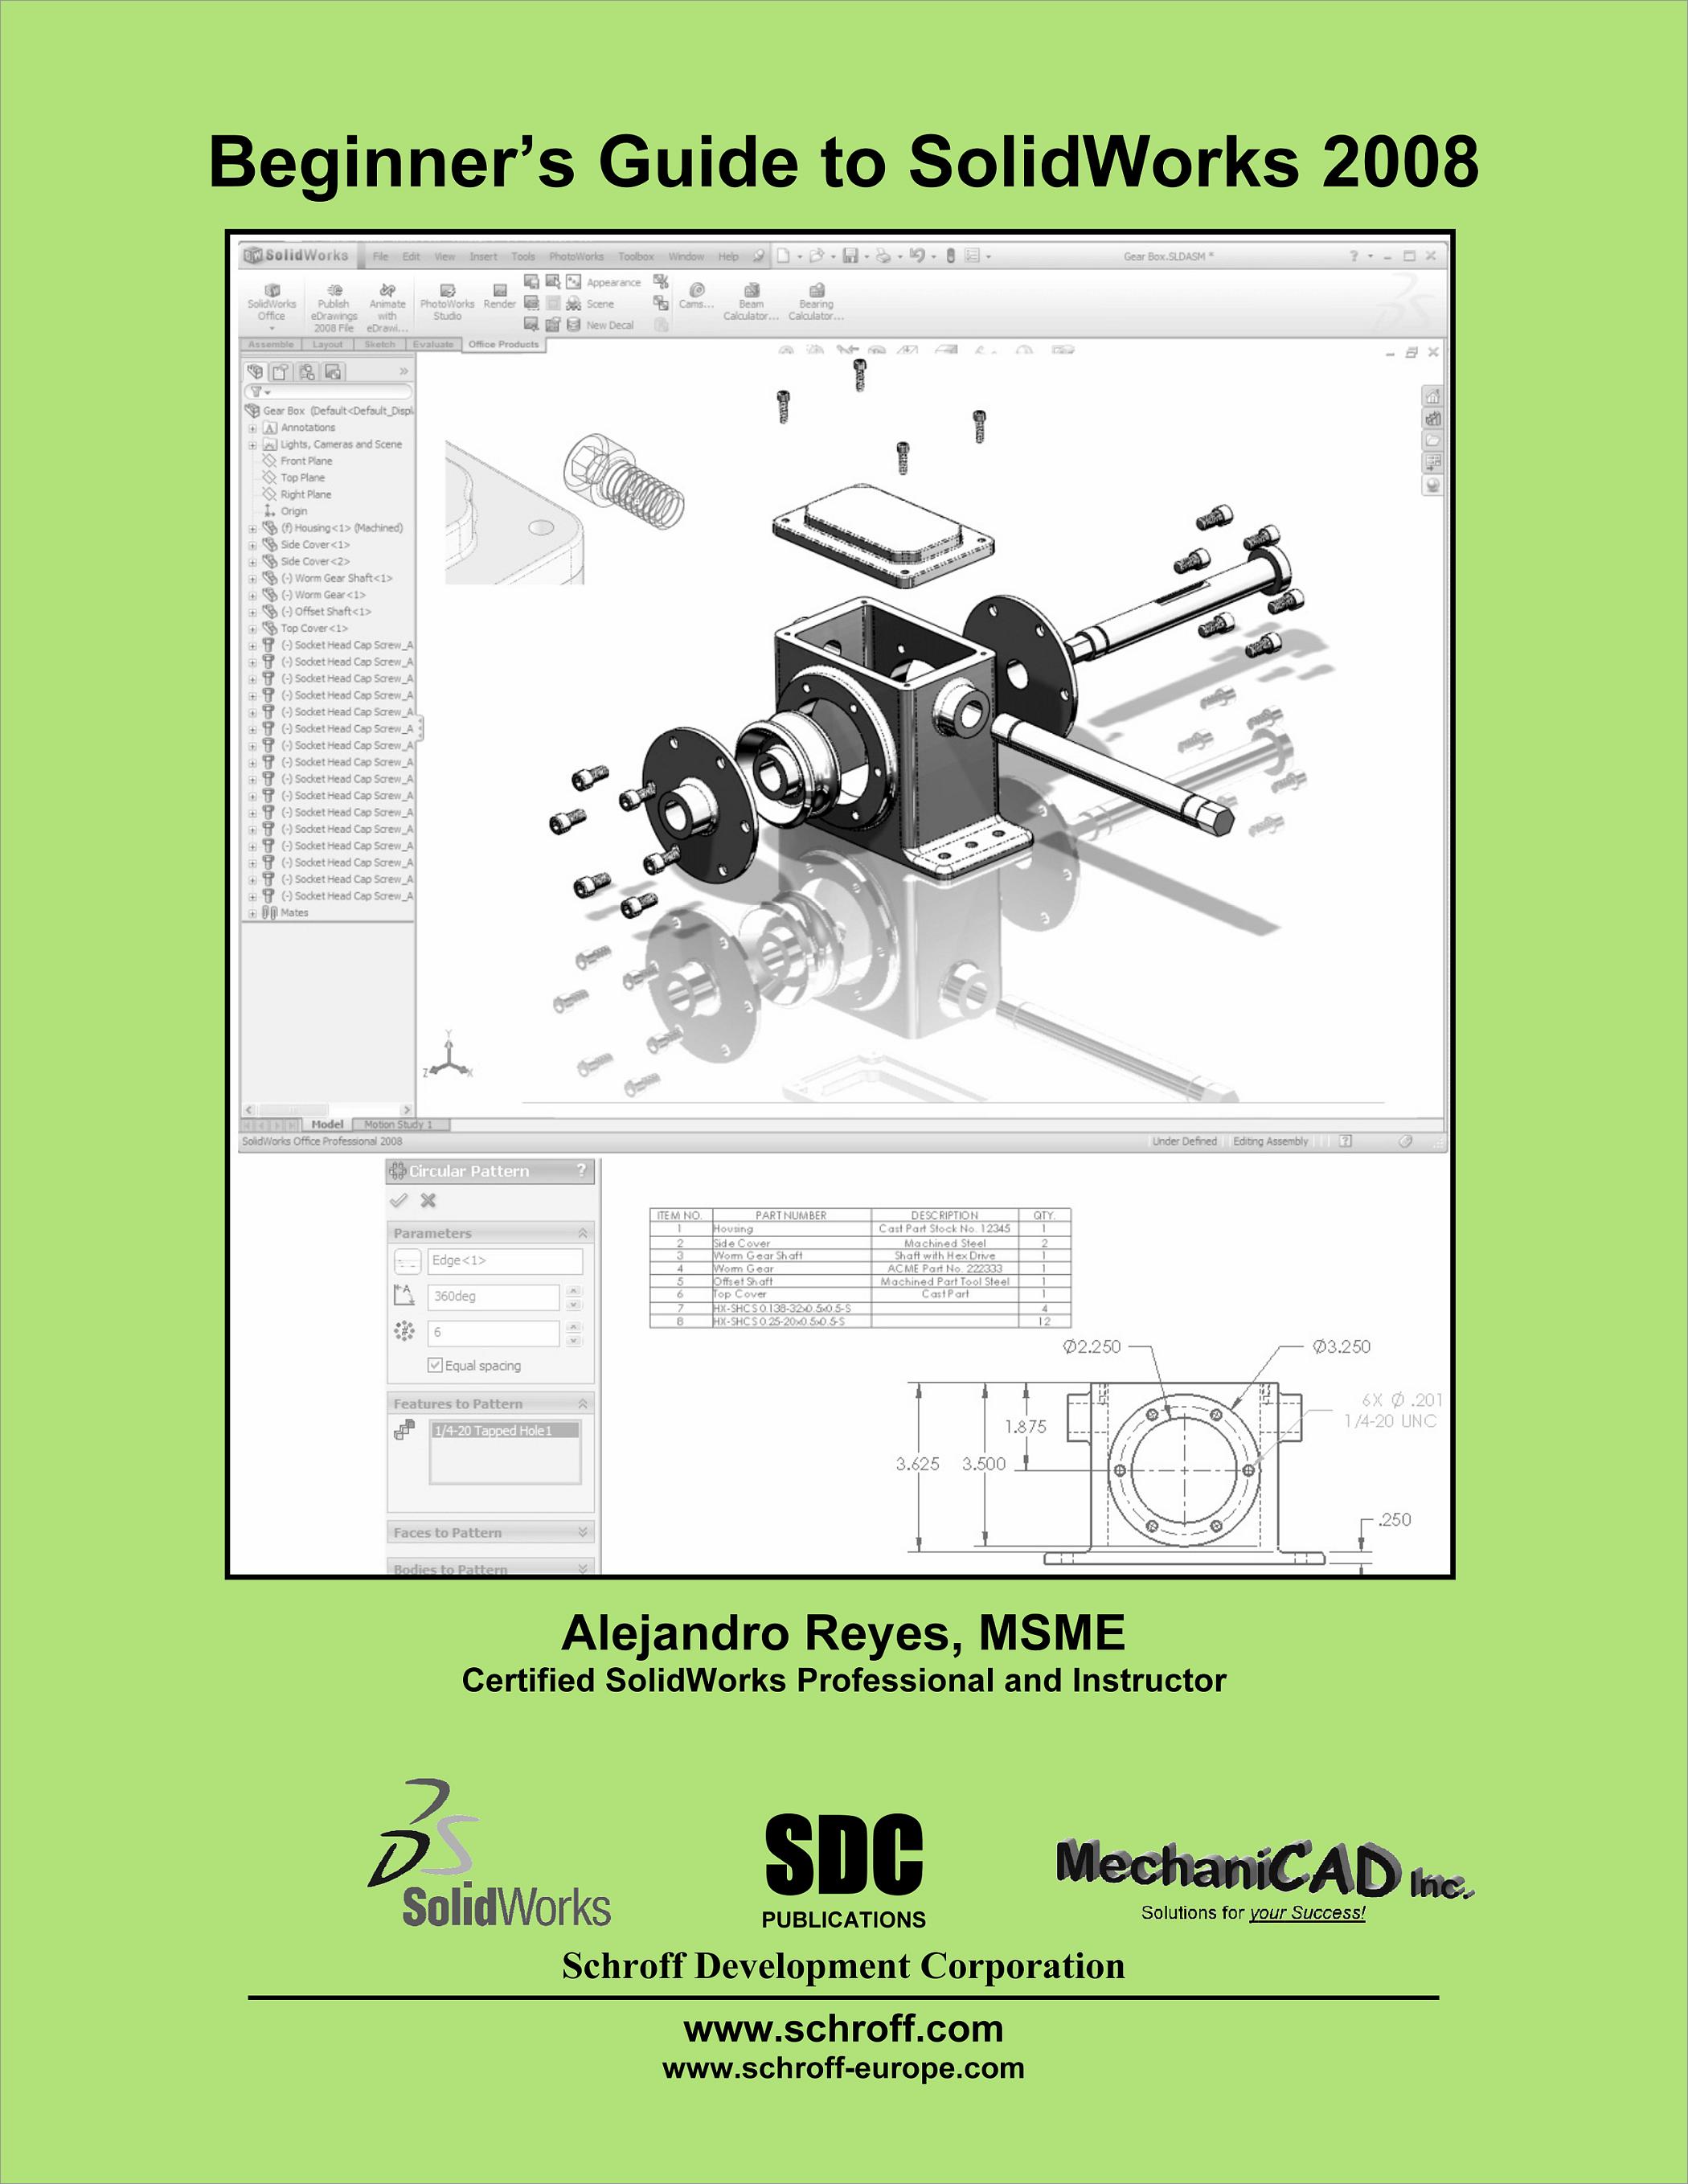 solidworks training book download